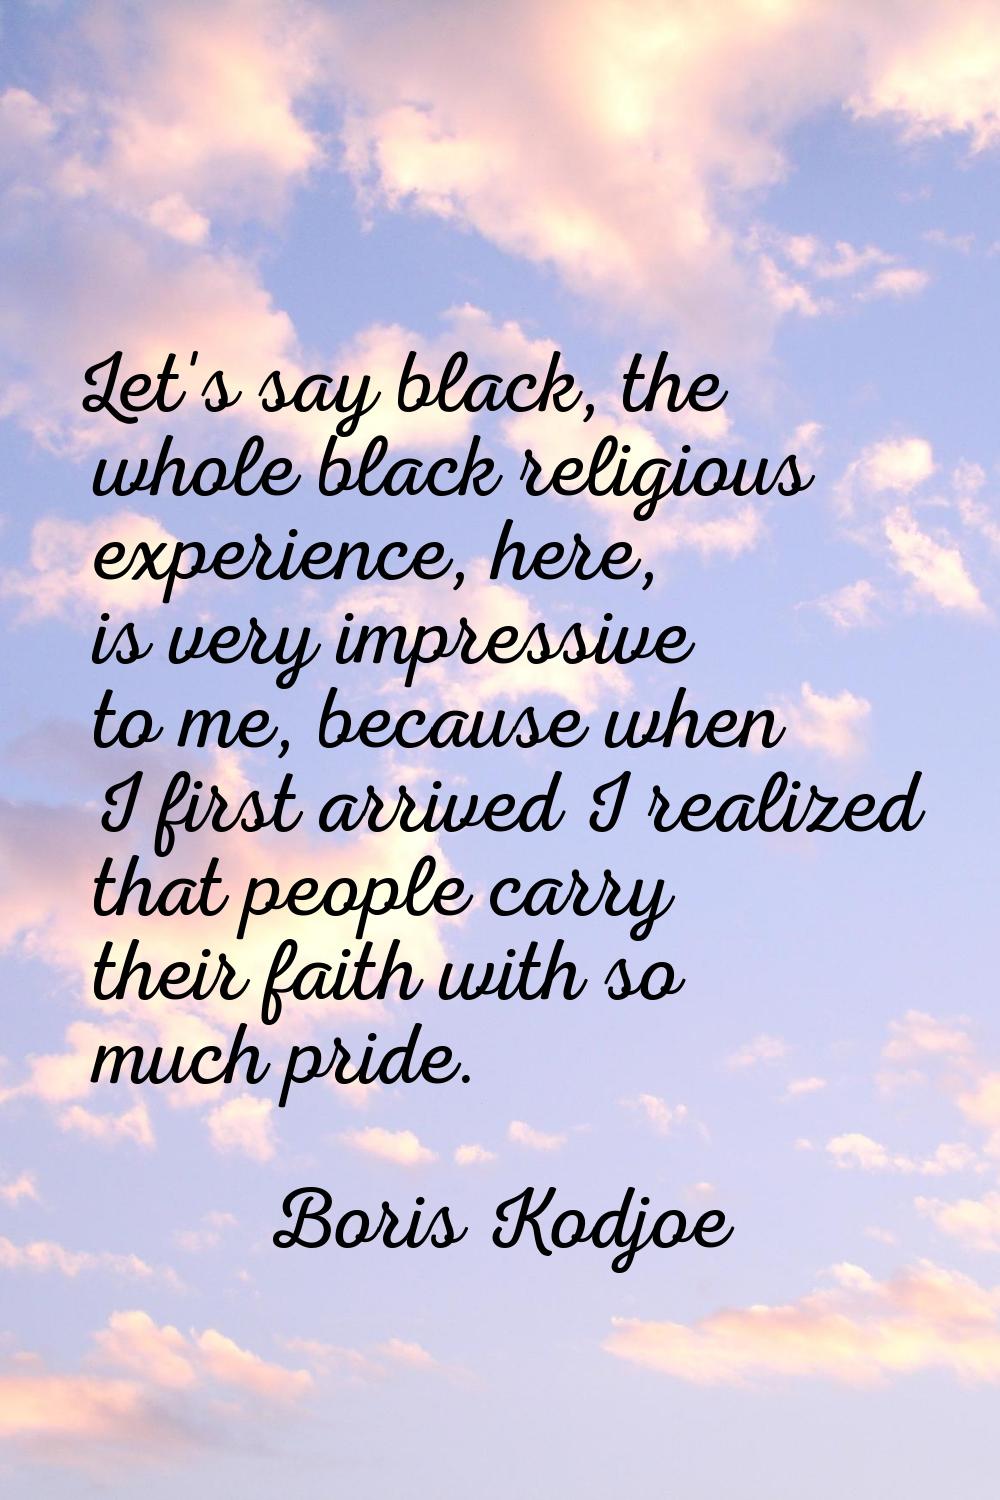 Let's say black, the whole black religious experience, here, is very impressive to me, because when